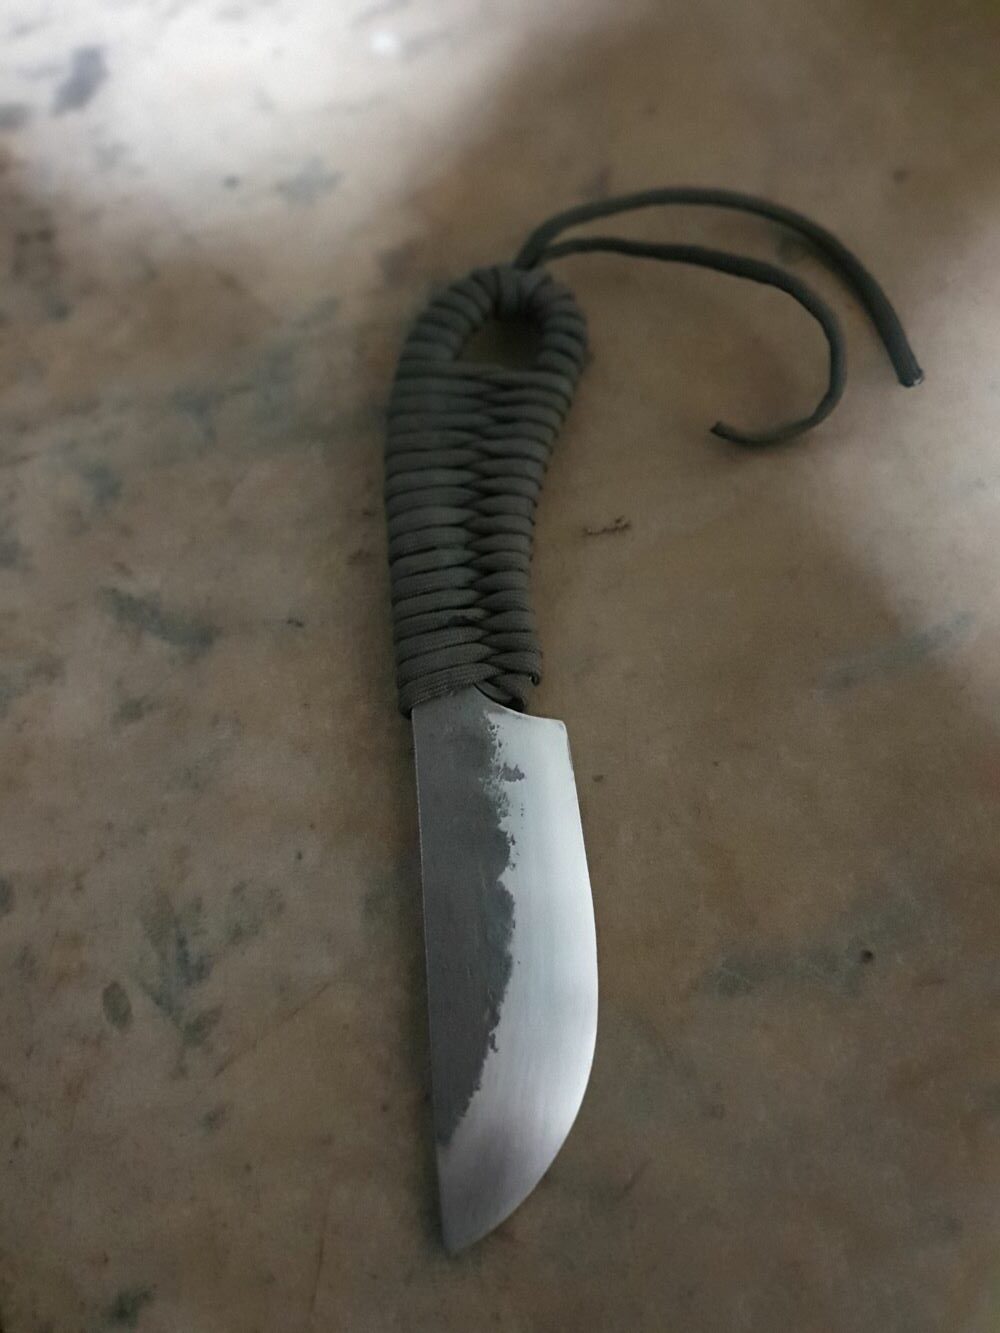 A finished knife with paracord wrap